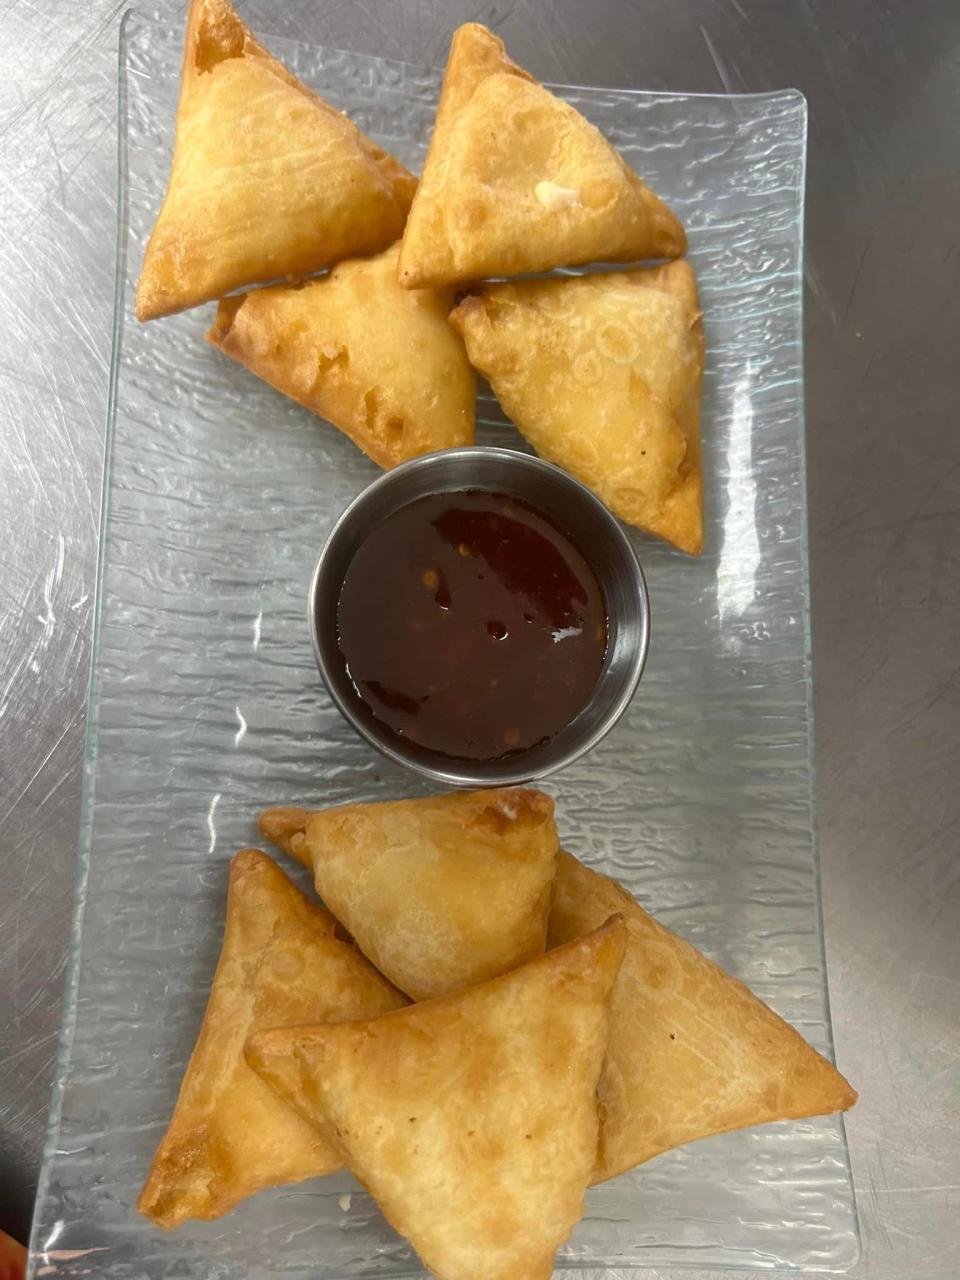 Share some Lobster Rangoon at Krave Restaurant and Bar.